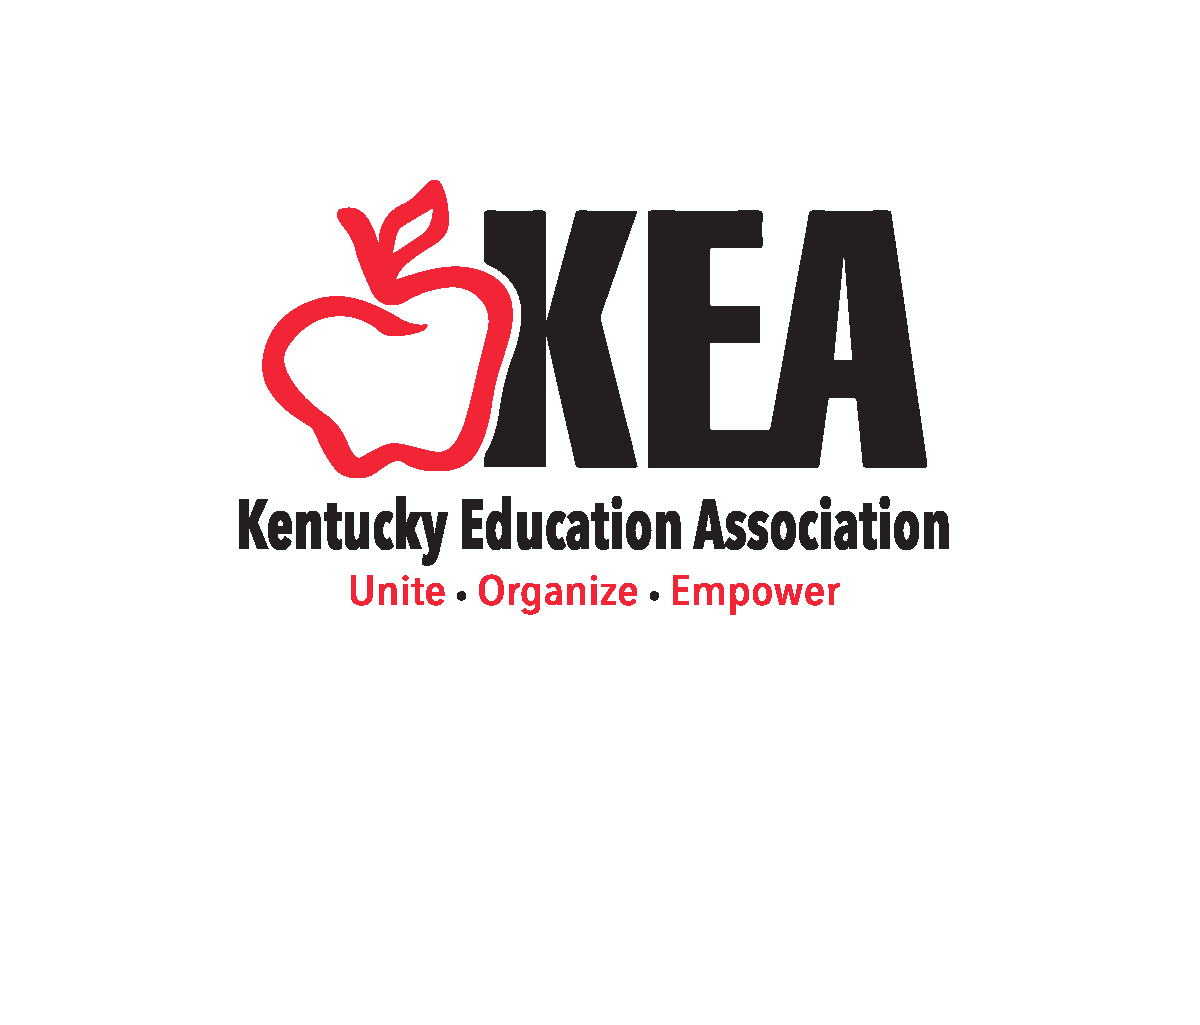 We look forward to seeing all our KEA delegates in Louisville tomorrow at our 151st Delegate Assembly! We are setting our union's course for the next 150 years! #KEAProud